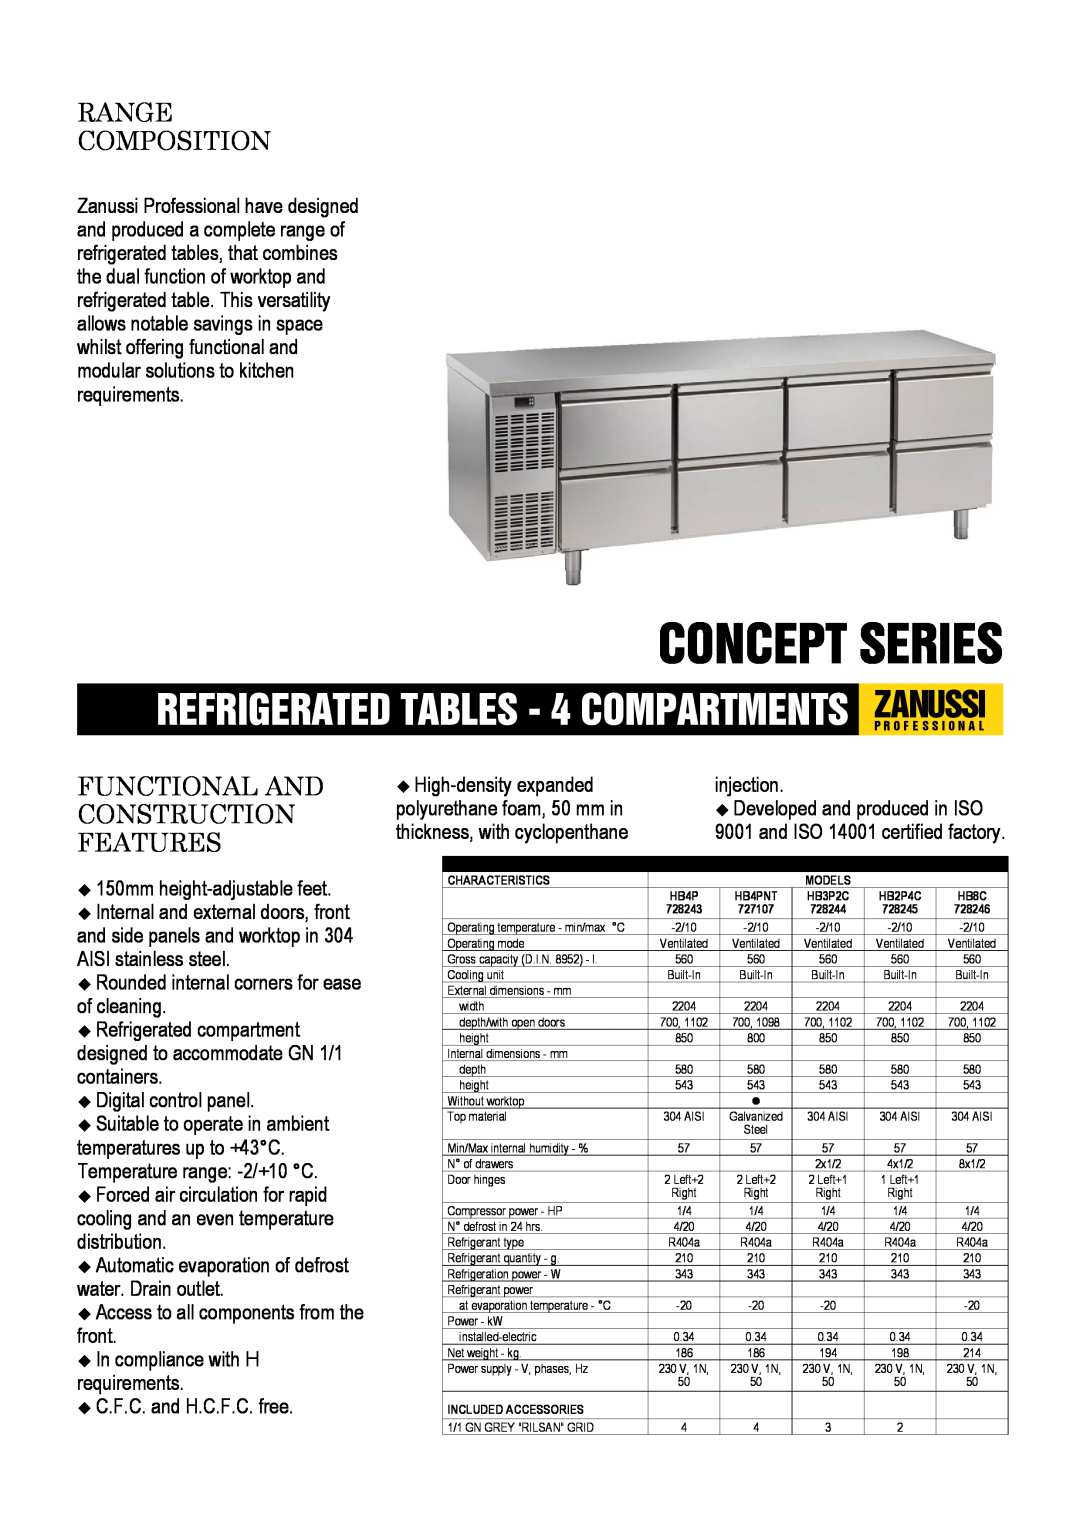 Zanussi 728246, 728244, 728245, 727107 dimensions Concept Series, Range Composition, Functional And Construction Features 